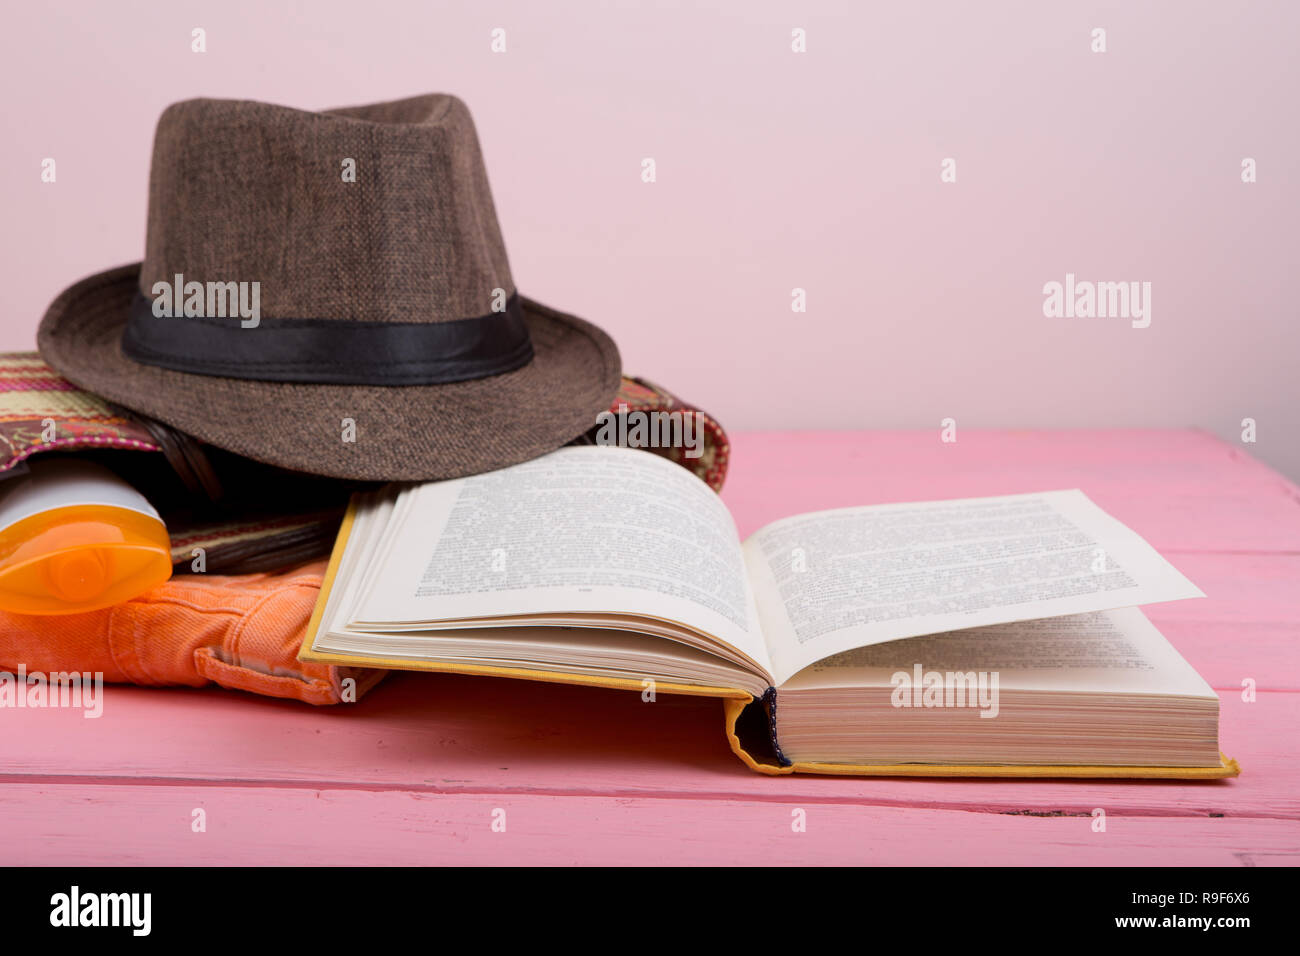 Summer accessories - straw beach bag, sun hat, open book, suntan lotion on pink wooden table Stock Photo